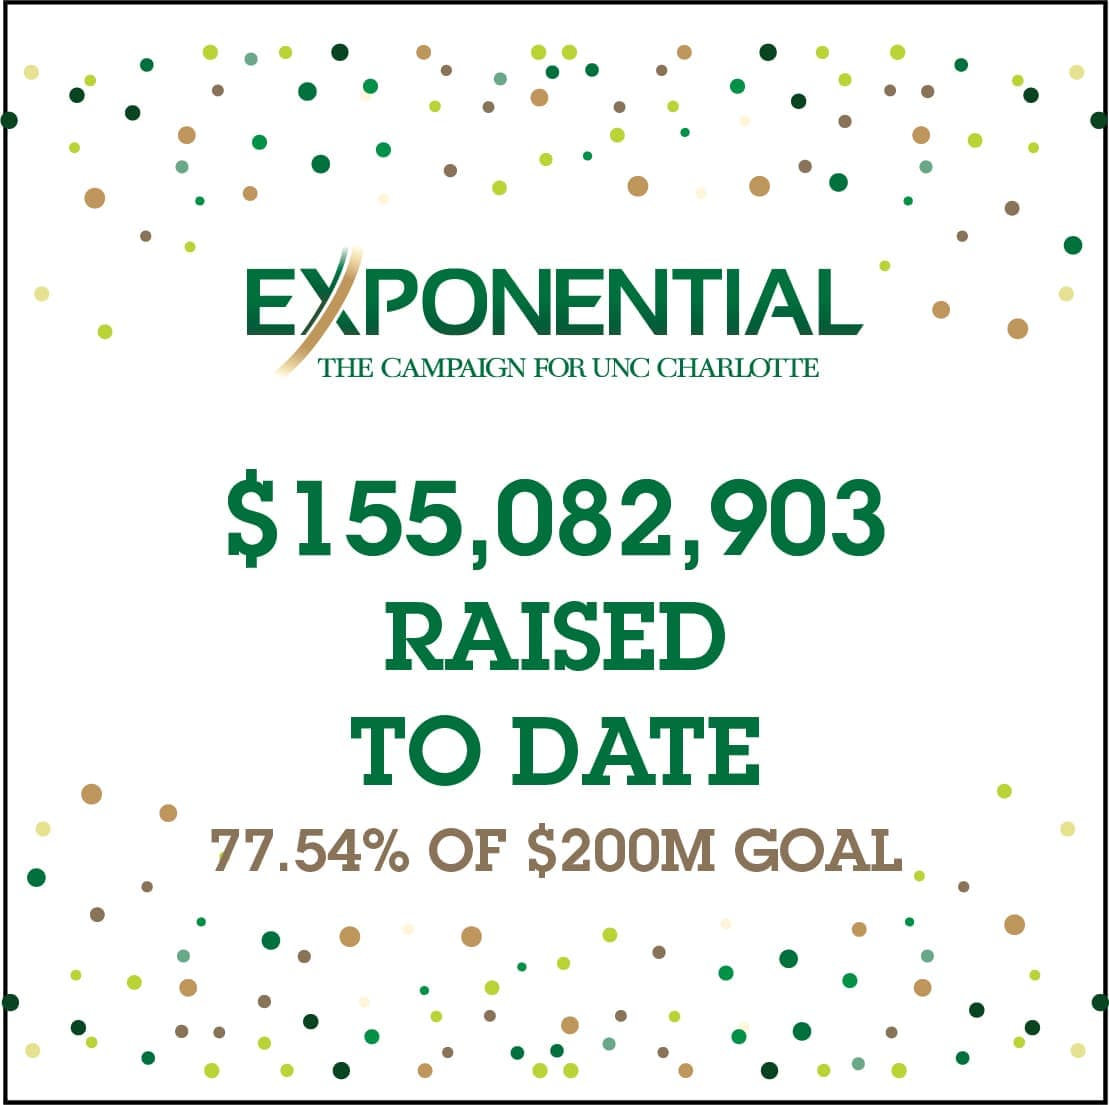 Exponential: $155,082,903 raised to date - 77.54% of $200M goal